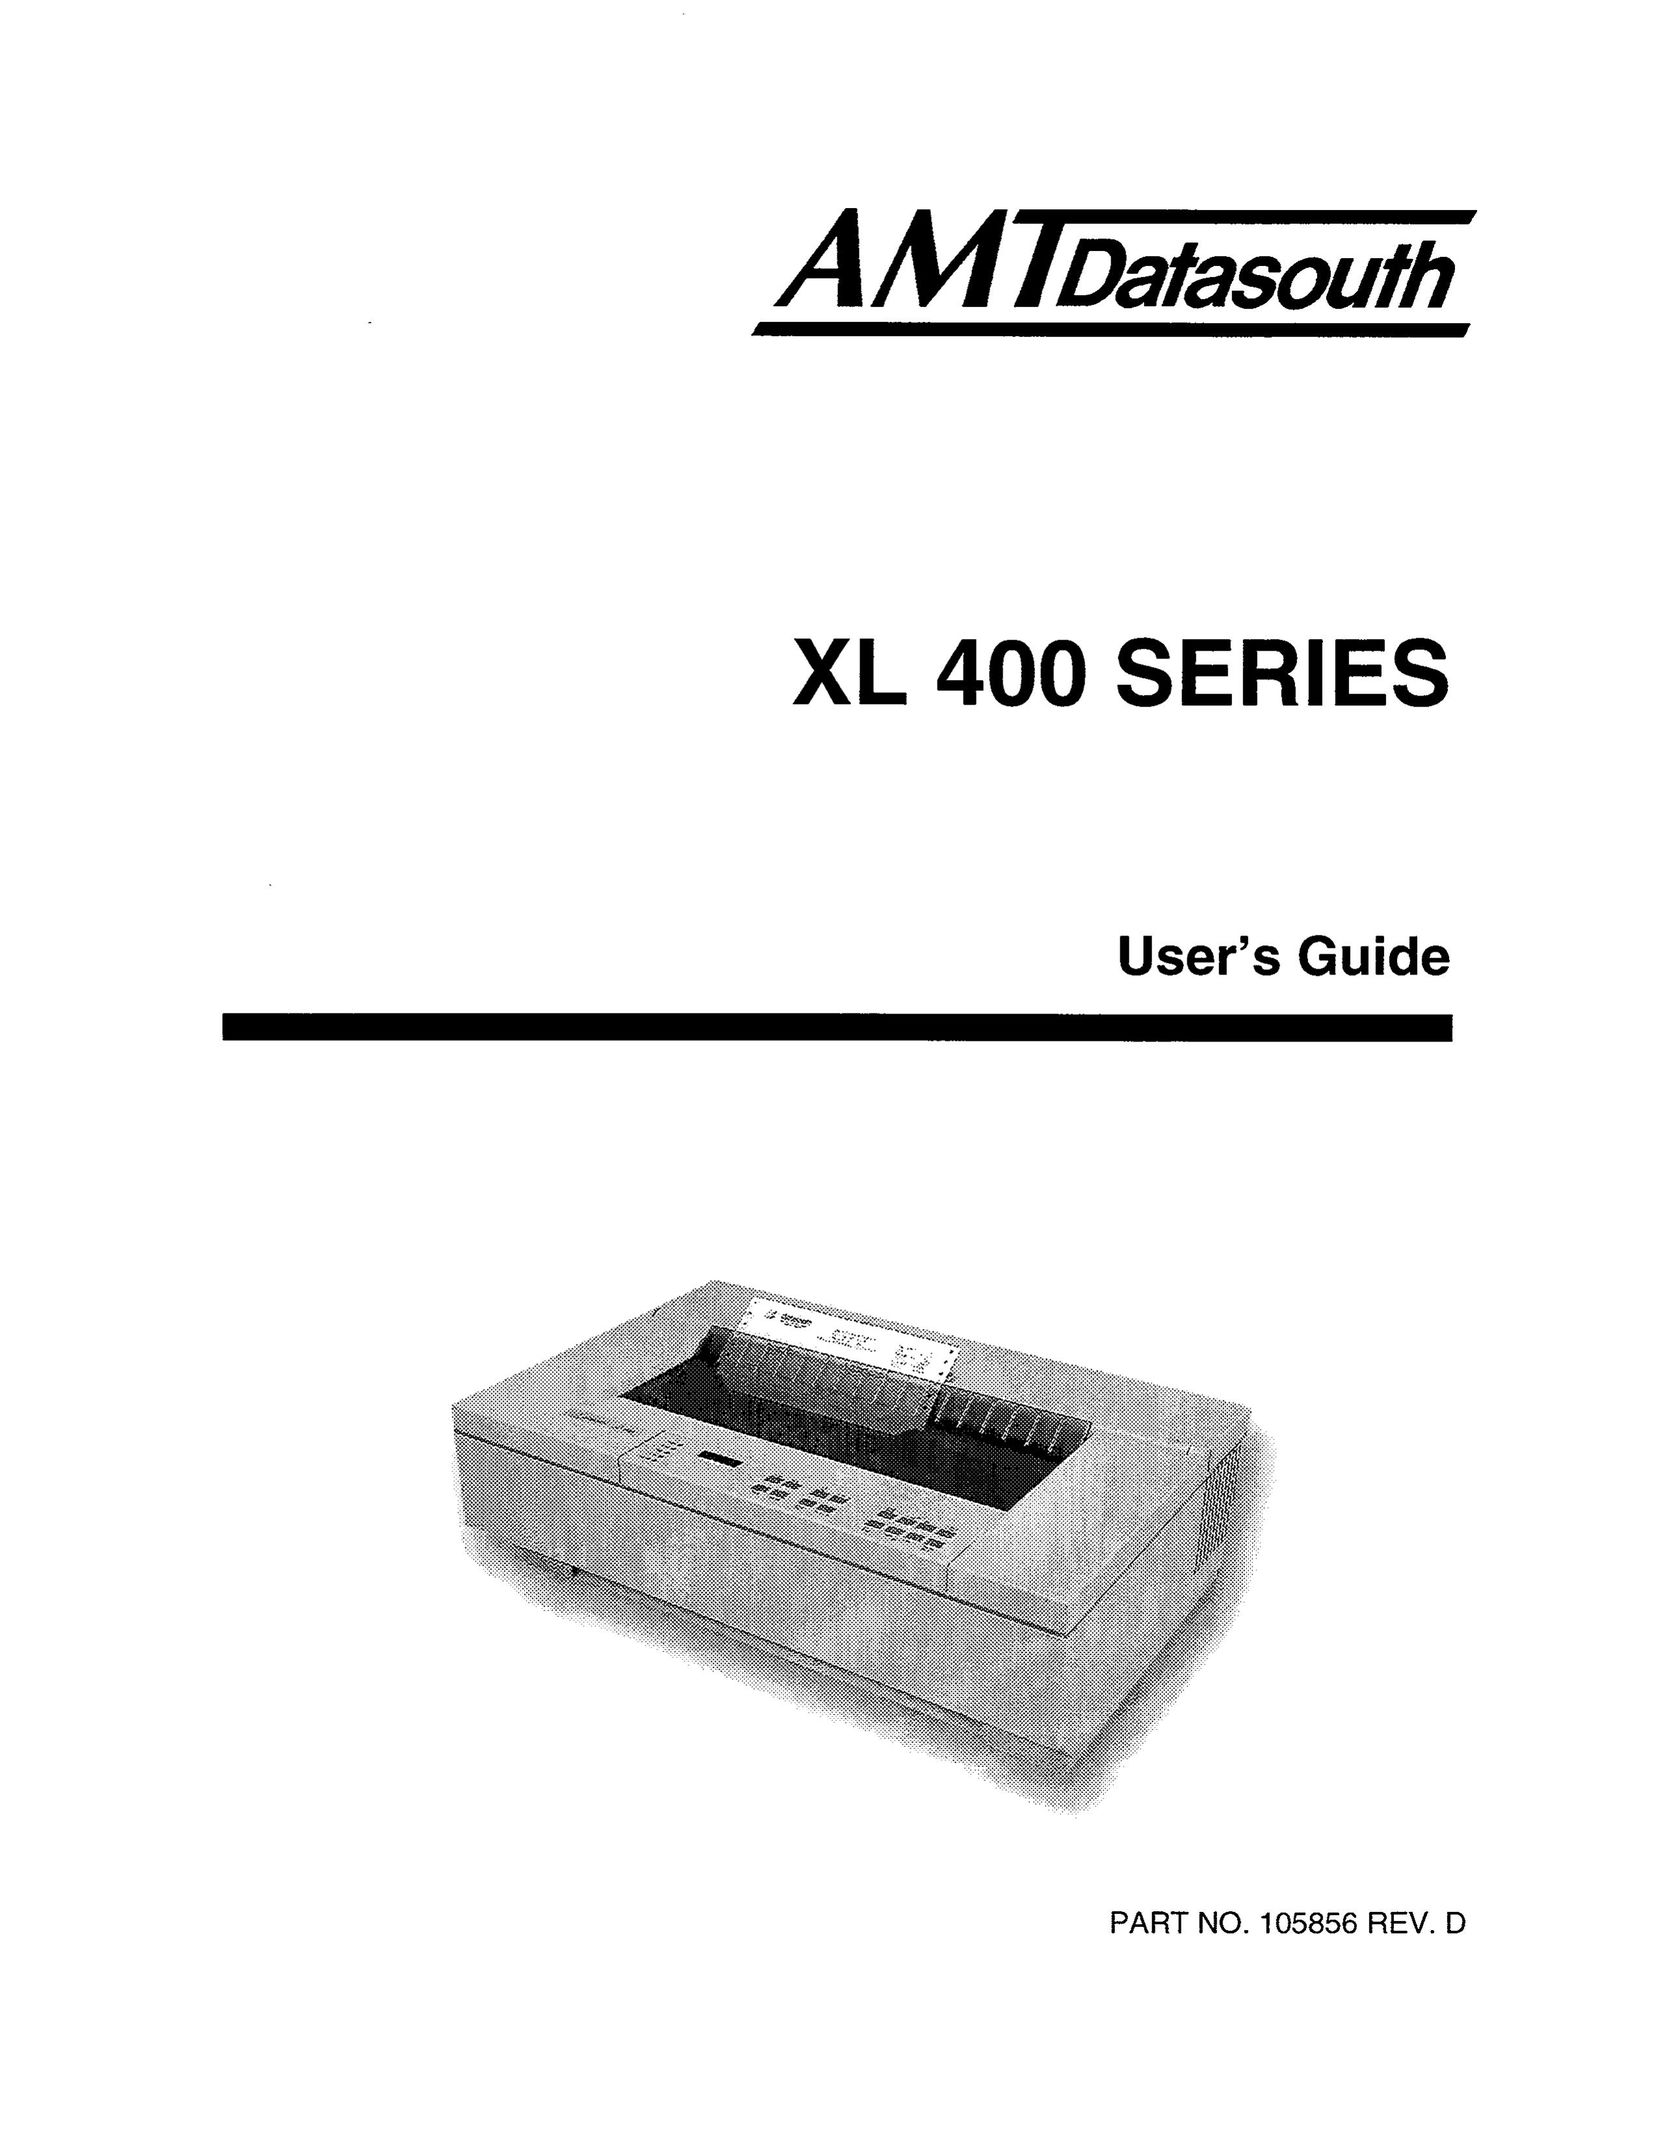 AMT Datasouth 41AY89AR777 All in One Printer User Manual